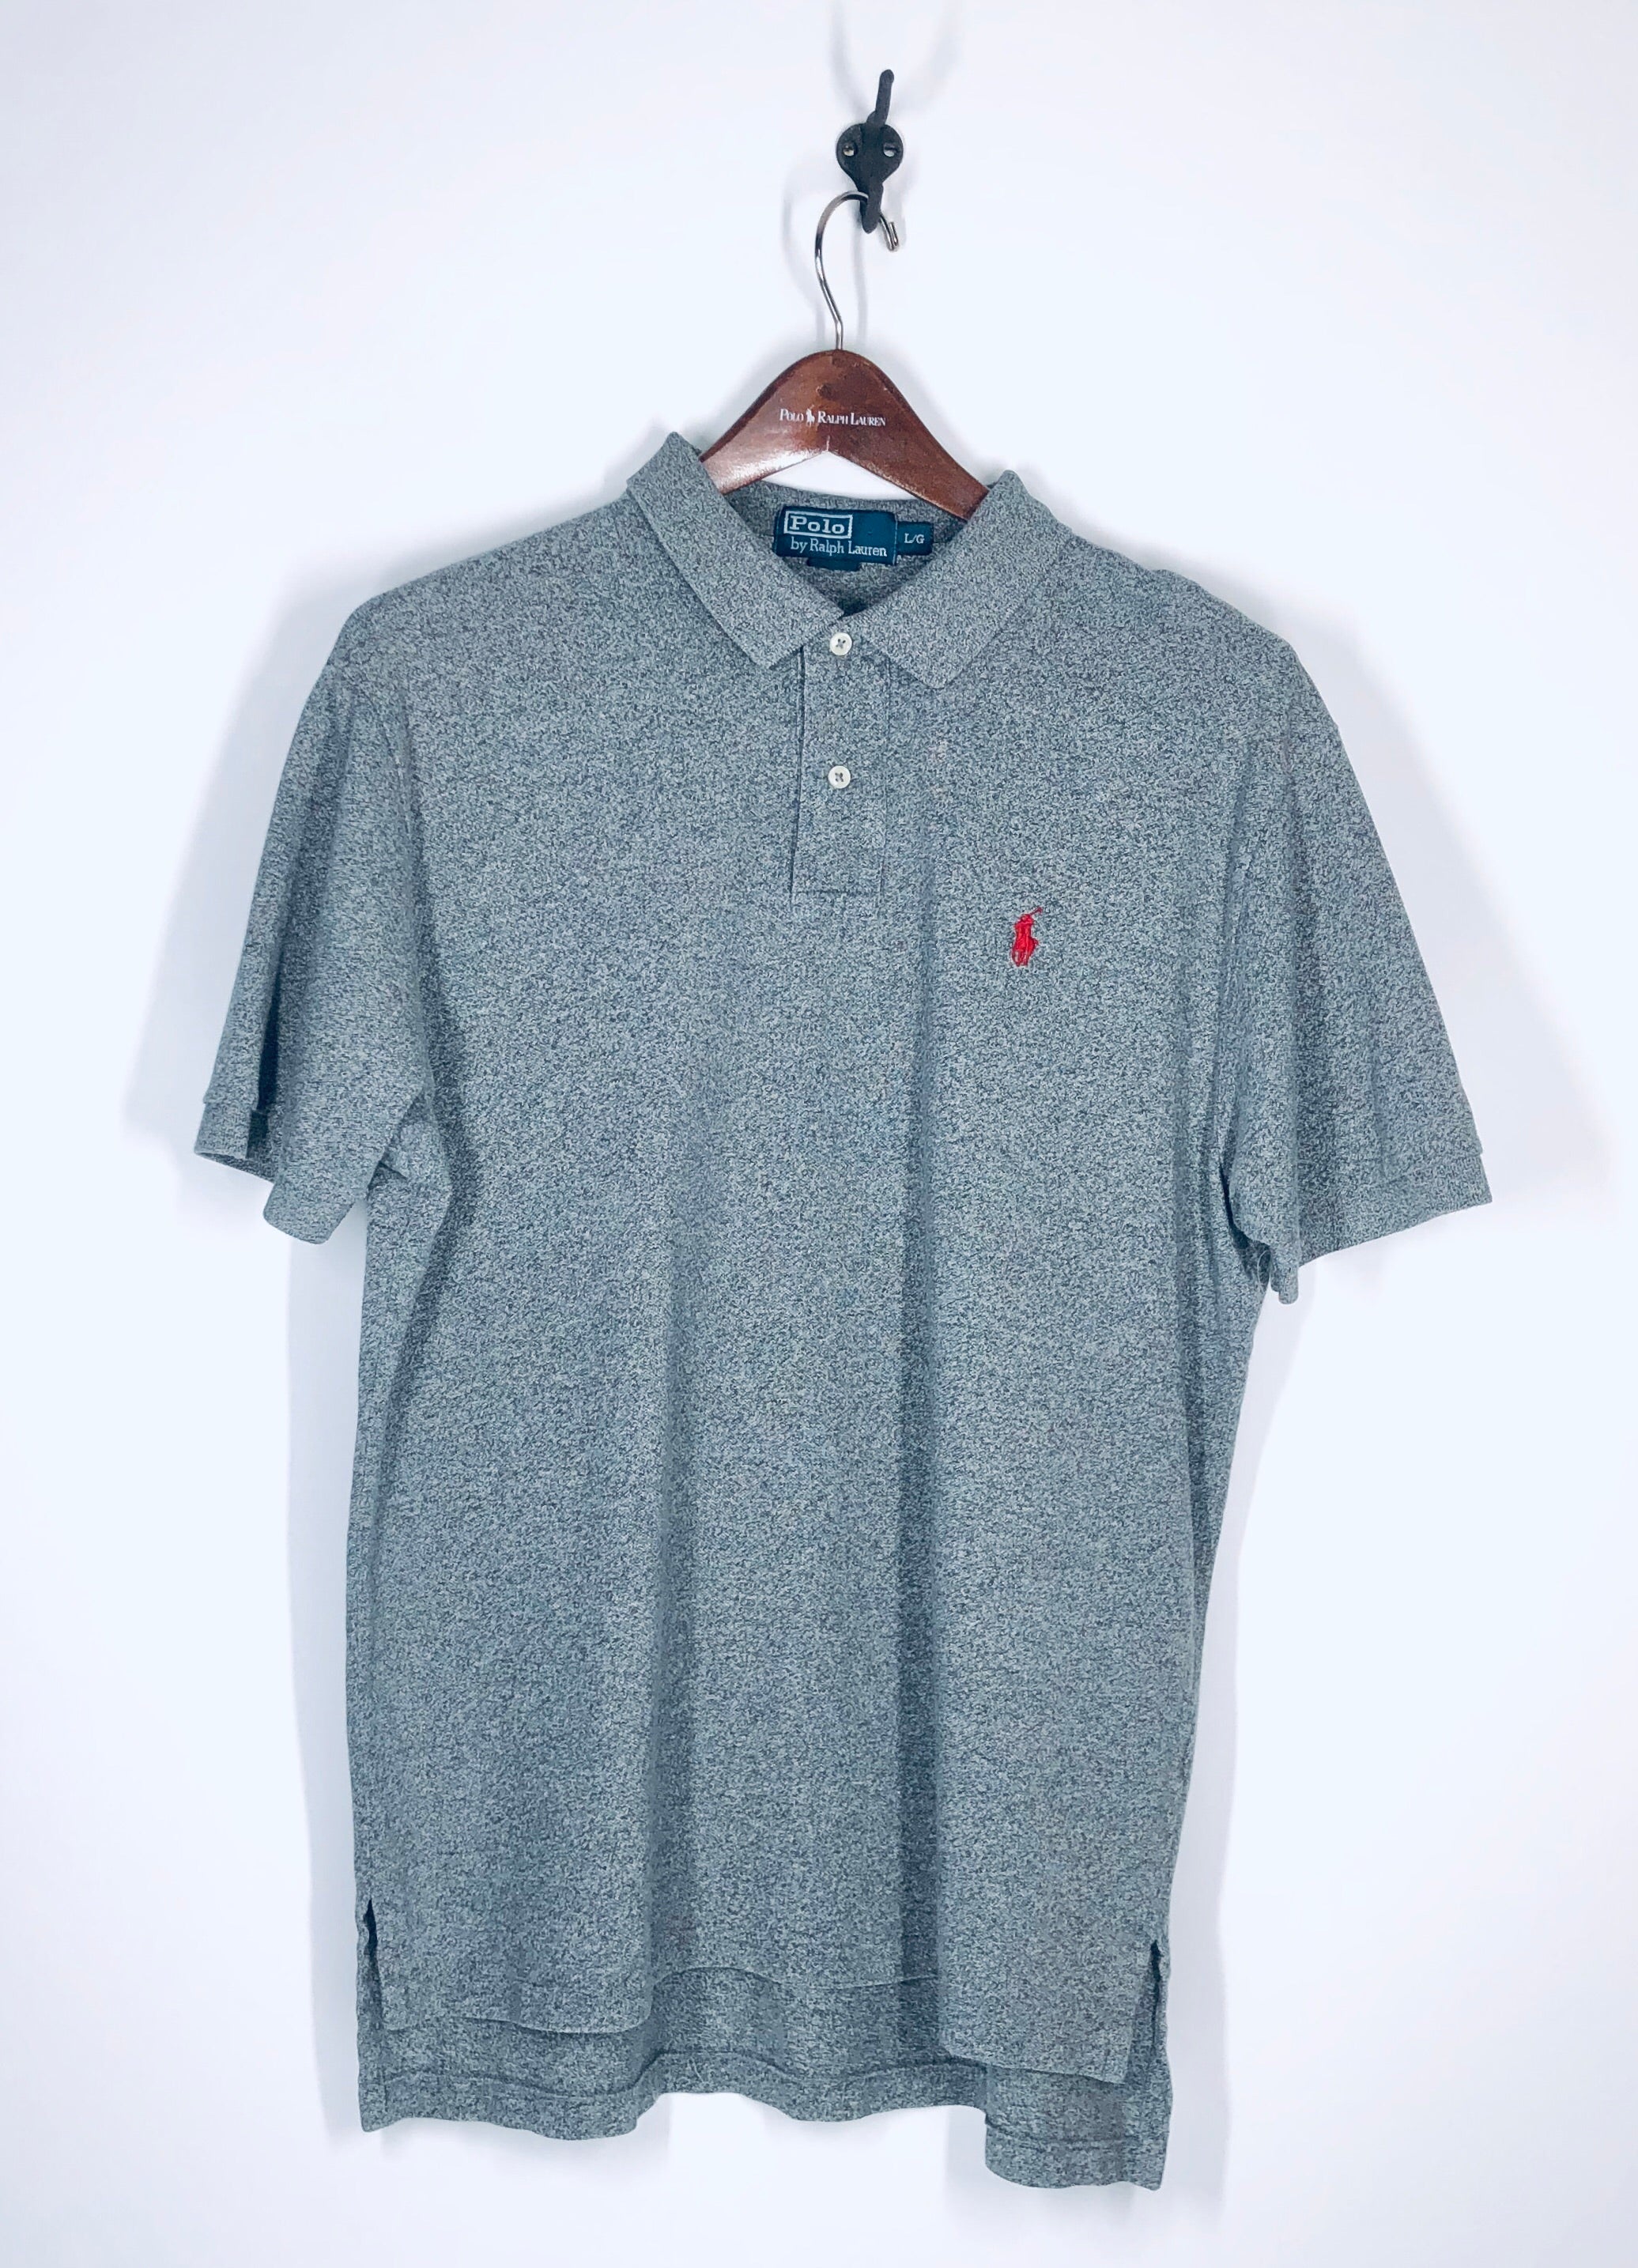 Polo by Ralph Lauren - L - Grey - Iconic Mesh